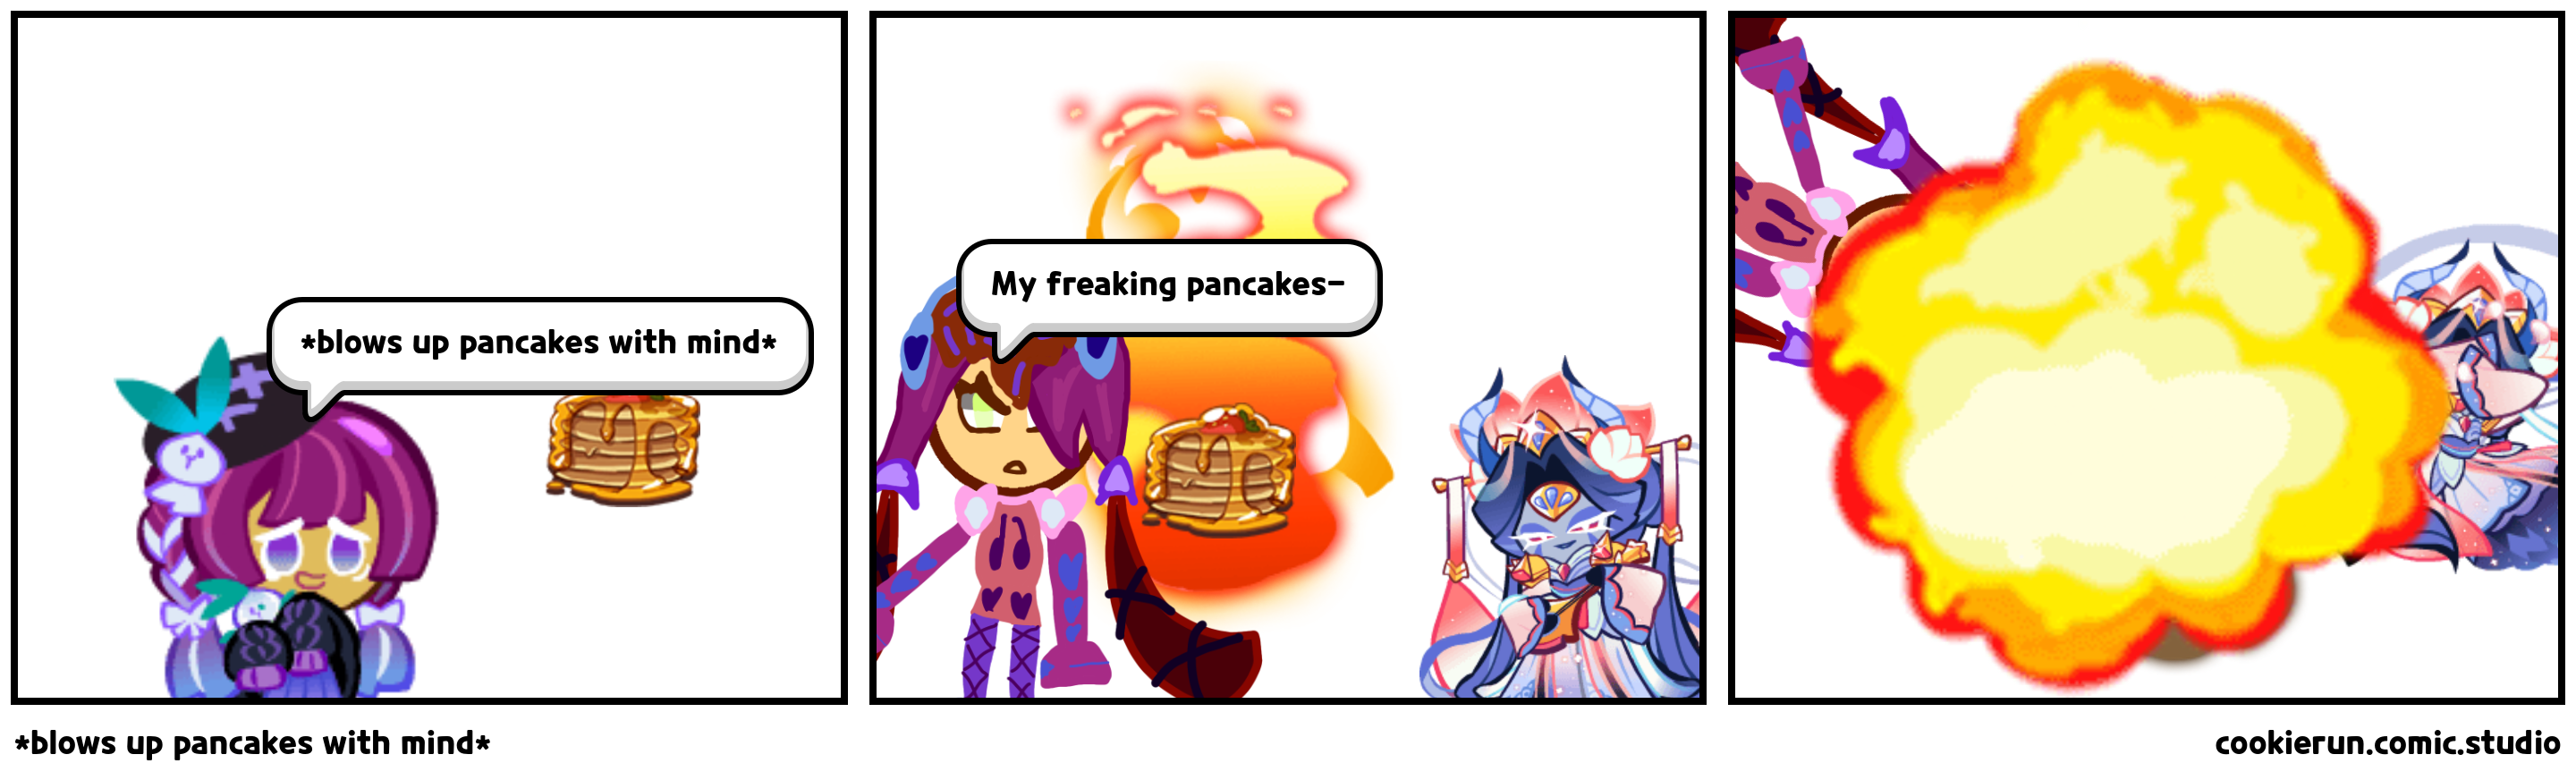 *blows up pancakes with mind*